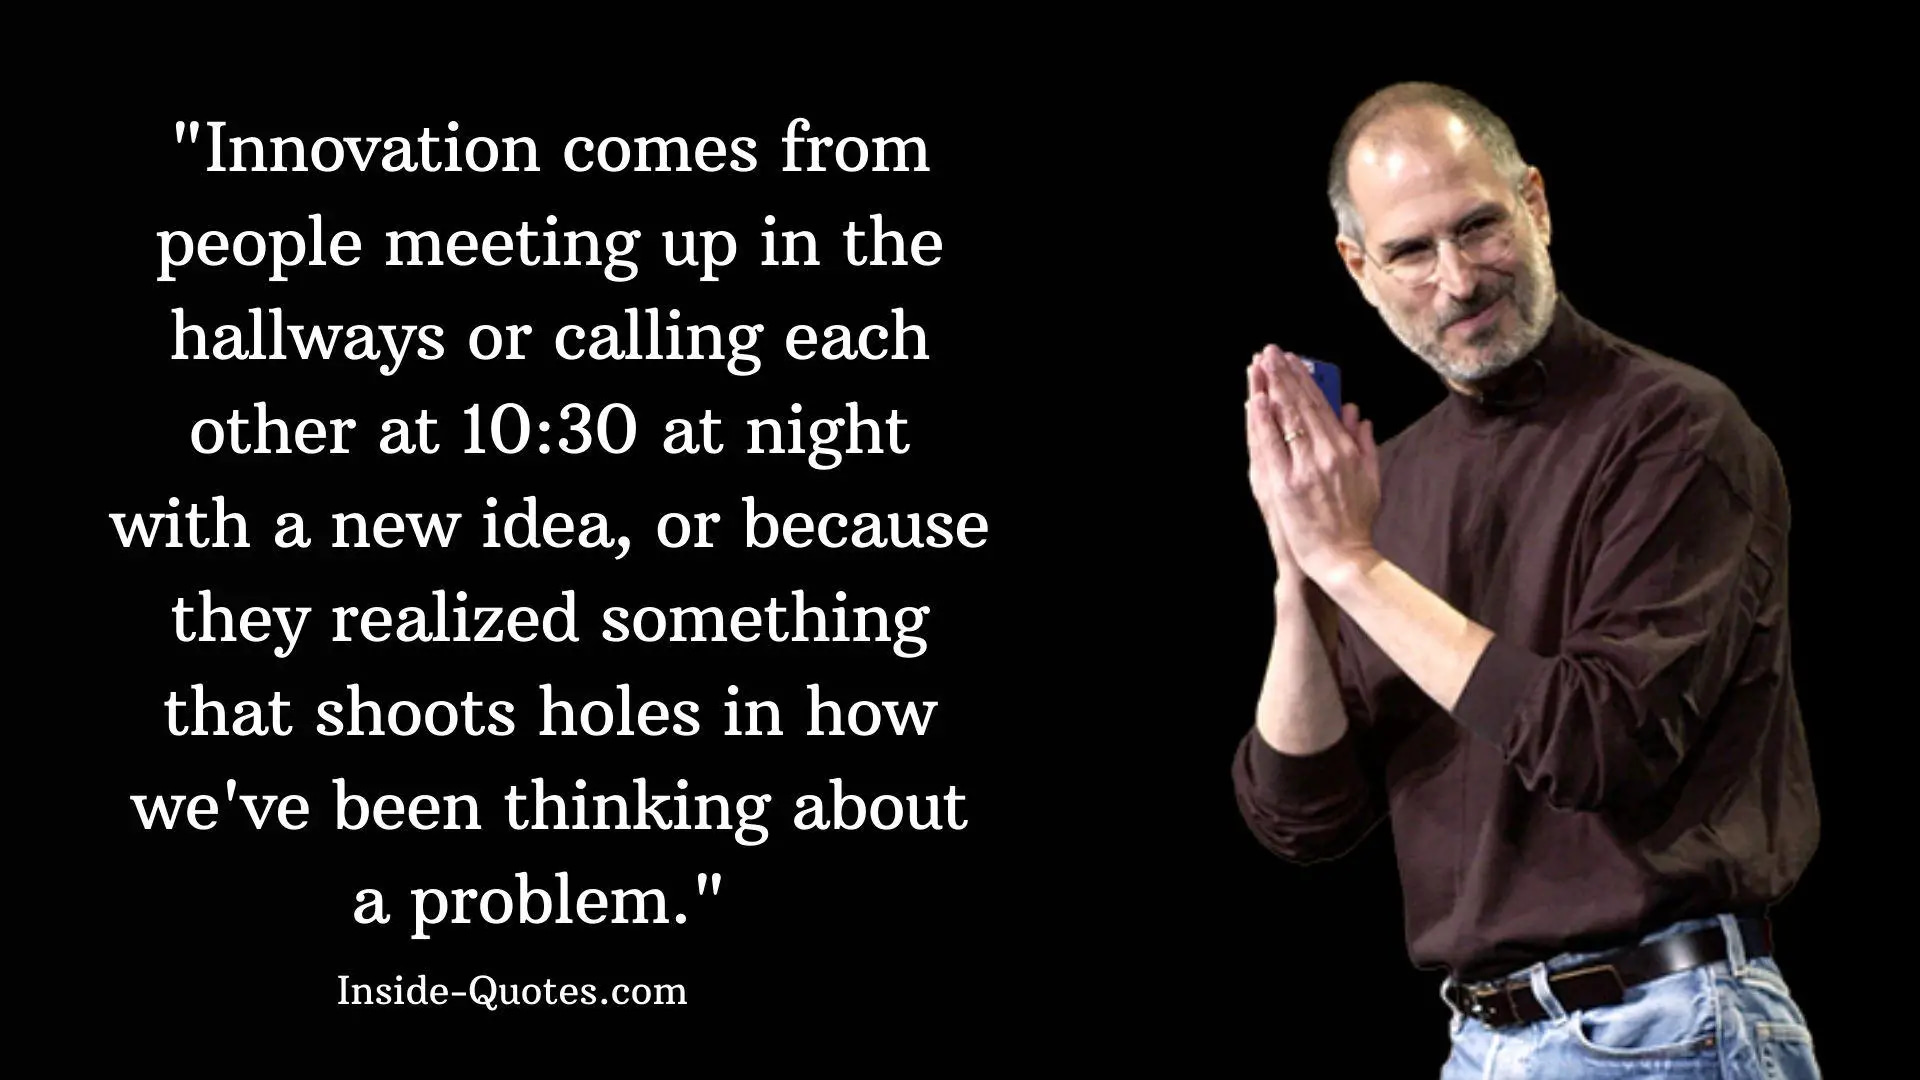 steve jobs quotes about success